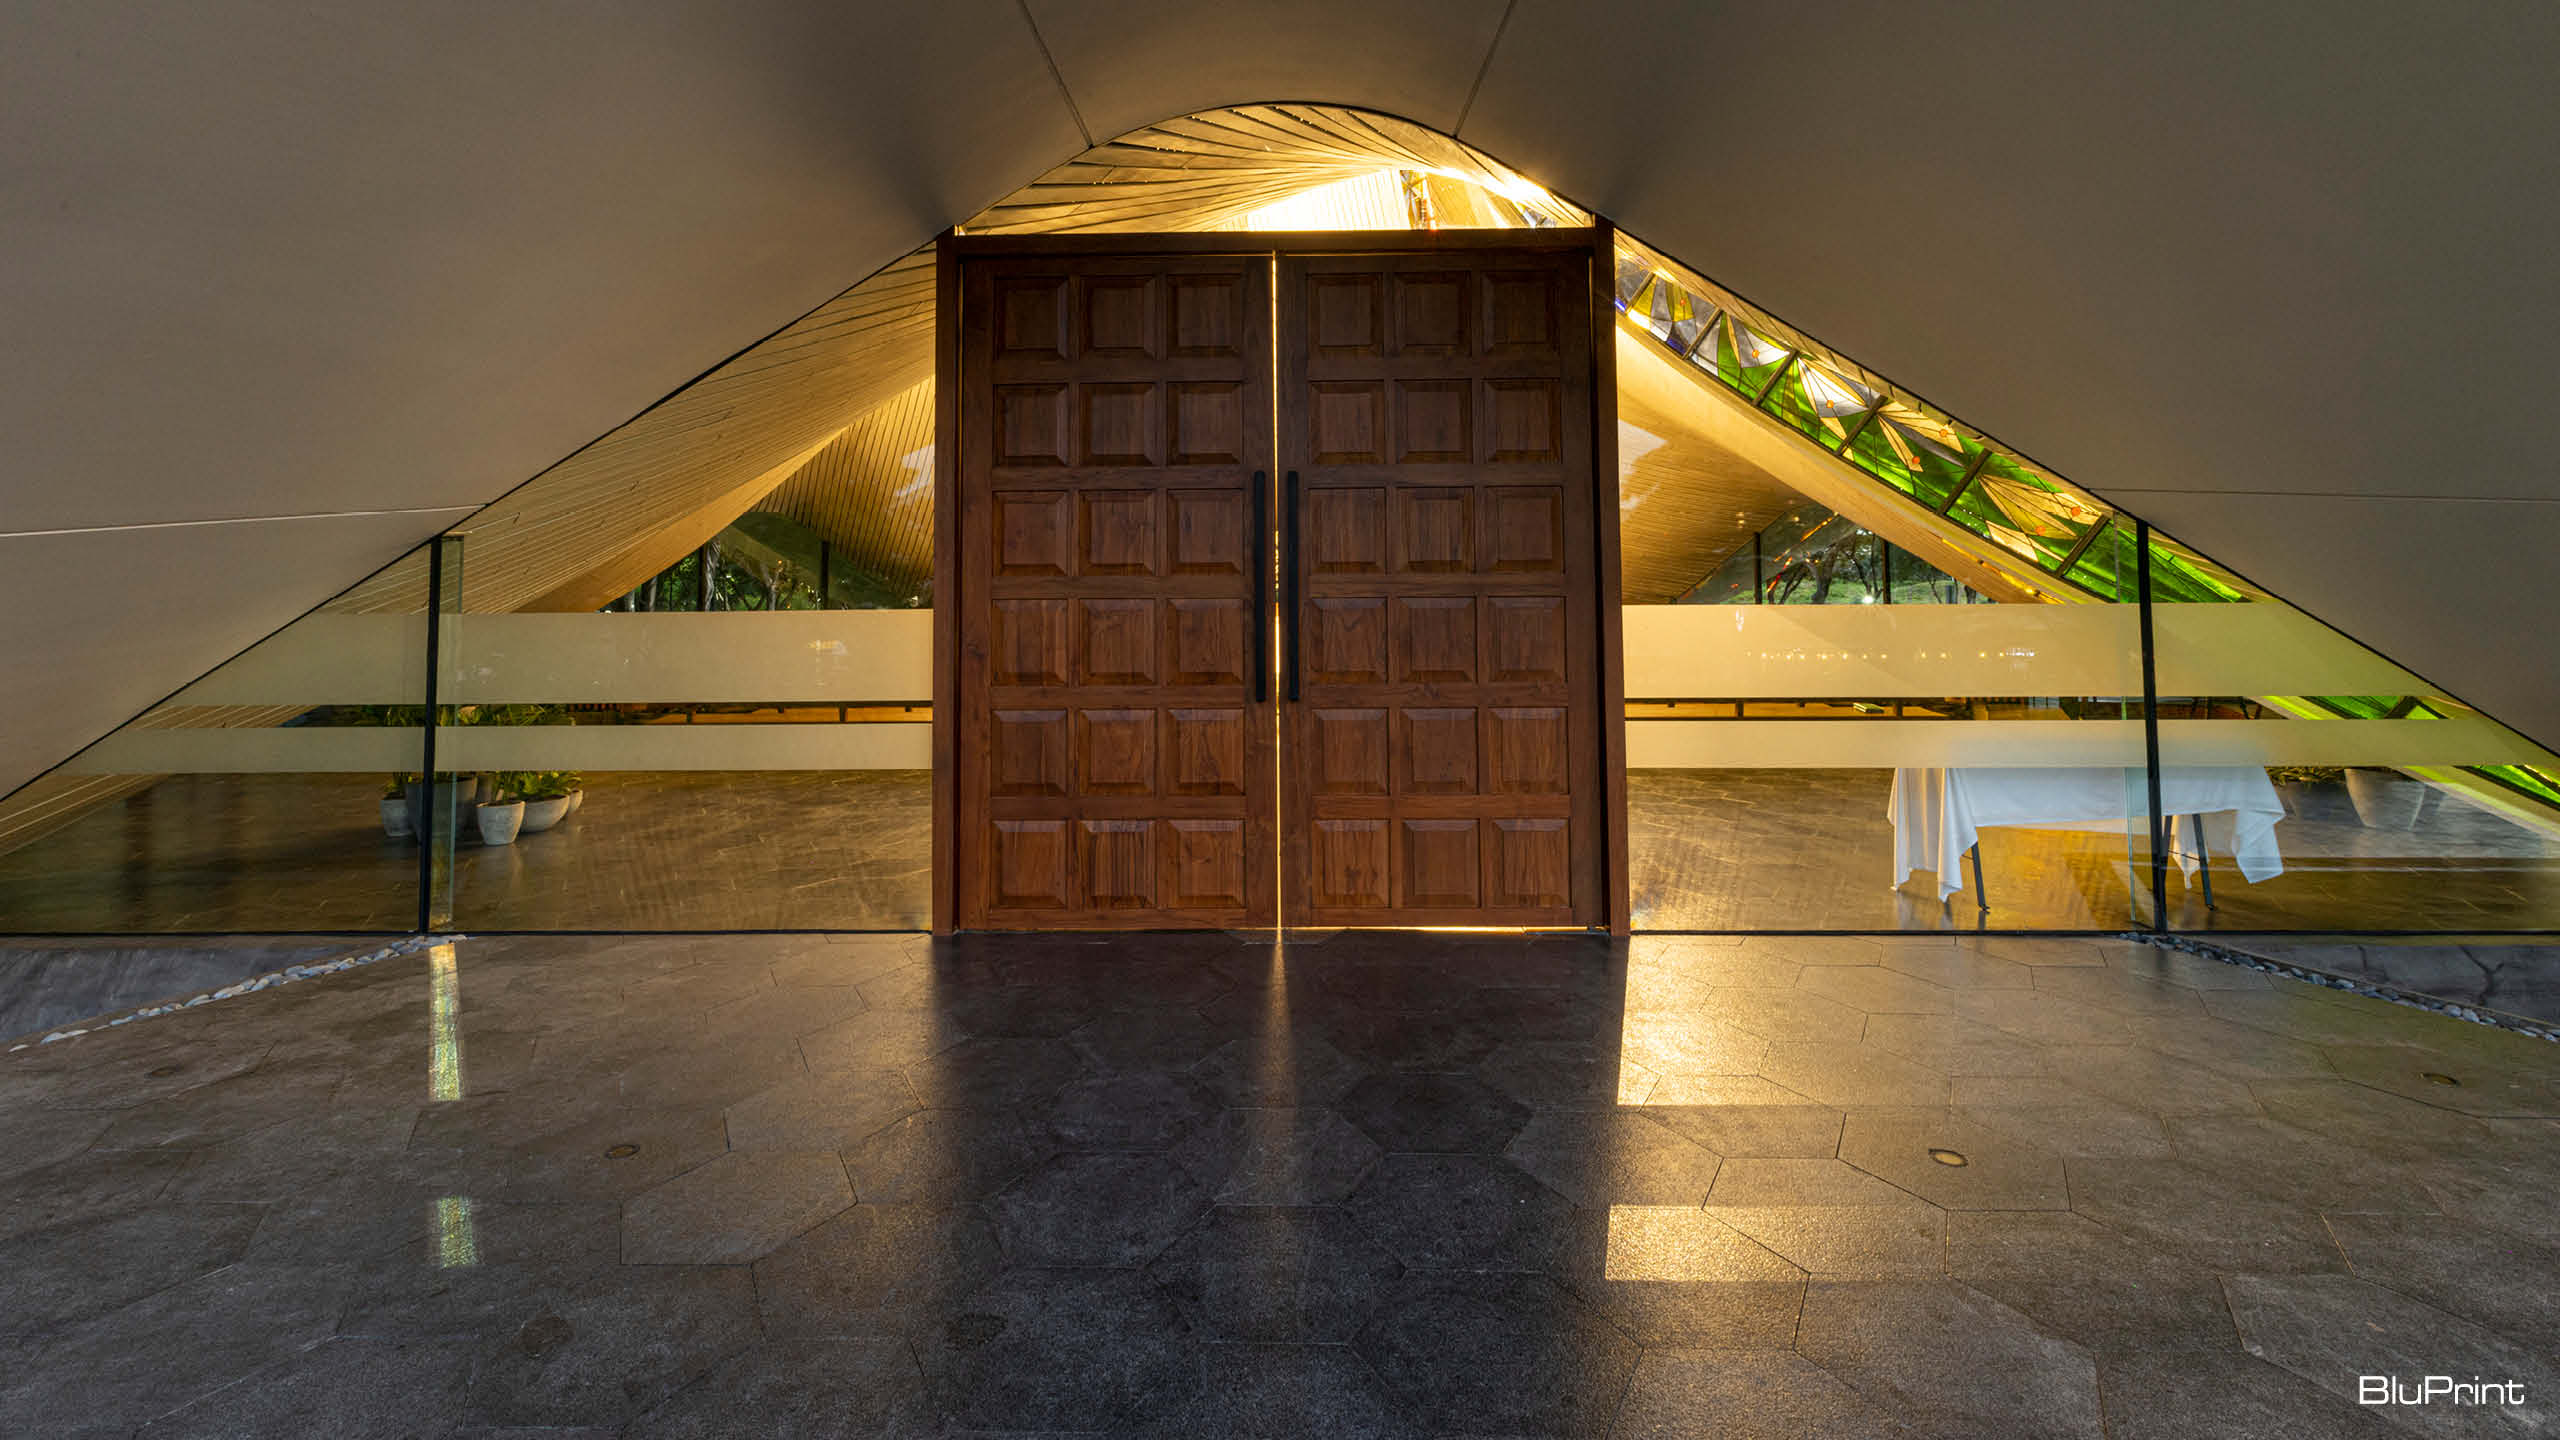 The wooden door of the Our Lady of Lourdes Chapel